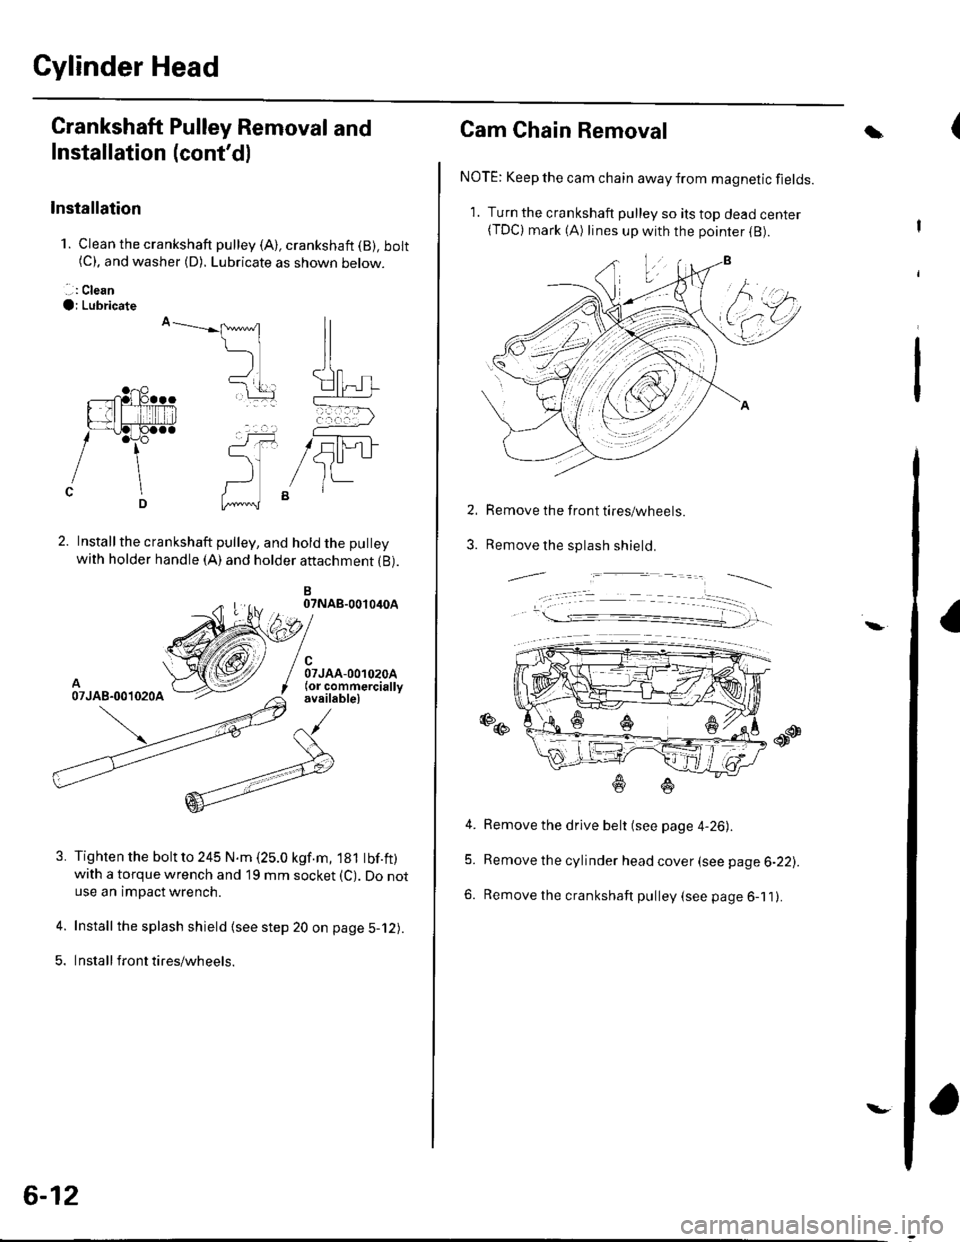 HONDA CIVIC 2003 7.G Workshop Manual Cylinder Head
Crankshaft Pulley Removal and
Installation (contdl
Installation
1. Clean the crankshaft pulley (A), crankshaft (B), bolt(C). and washer (D). Lubricate as shown below.
. .: Clean
O; Lubr